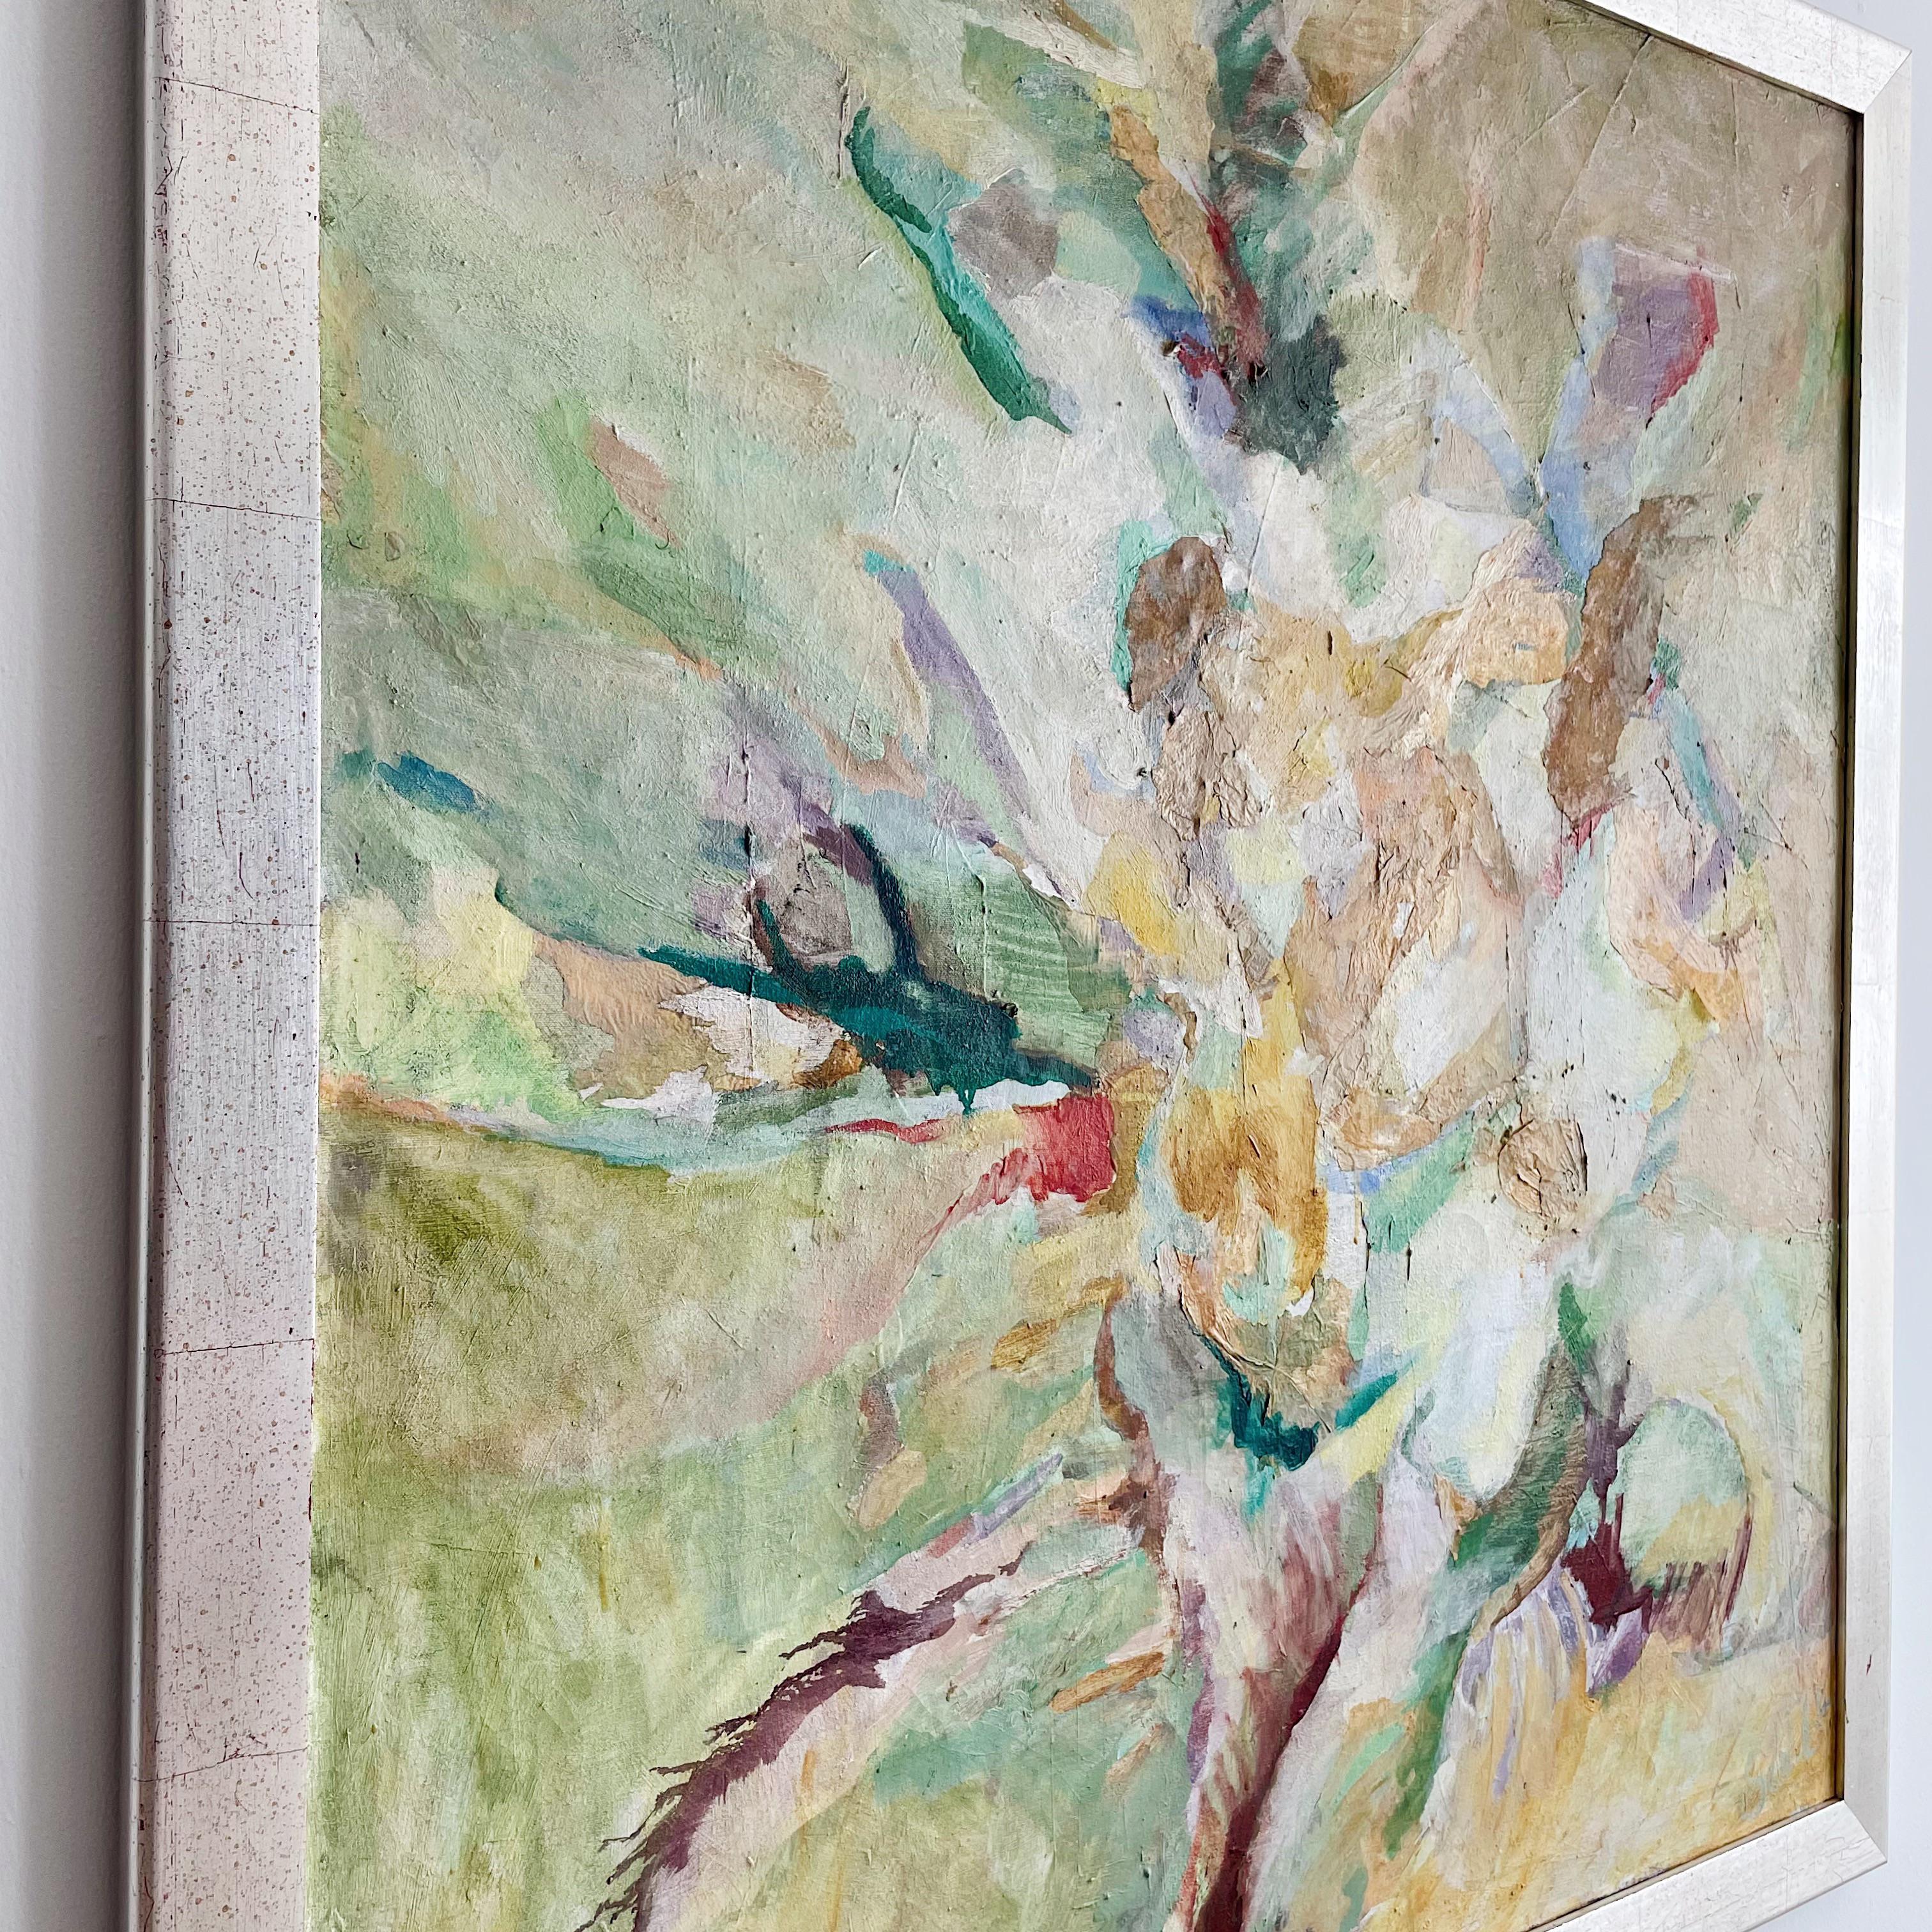 Multi color abstract vintage painting on canvas. Illegible signature dated 1964. in contemporary silver leaf frame.